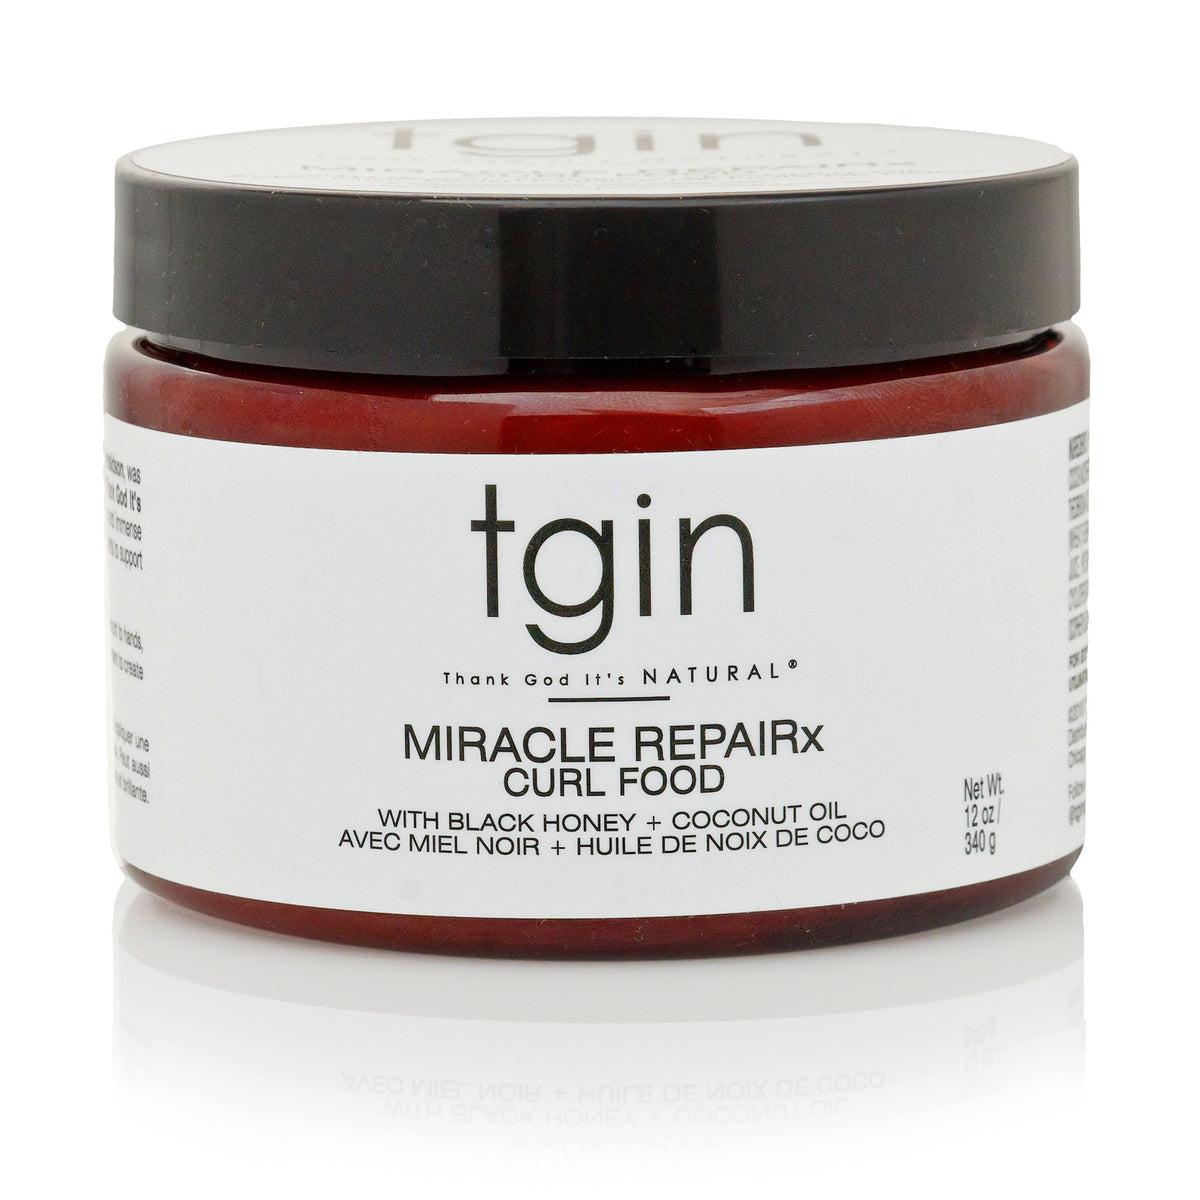 TGIN - Miracle RepaiRx Curl Food Daily Moisturizer (Soin quotidien)